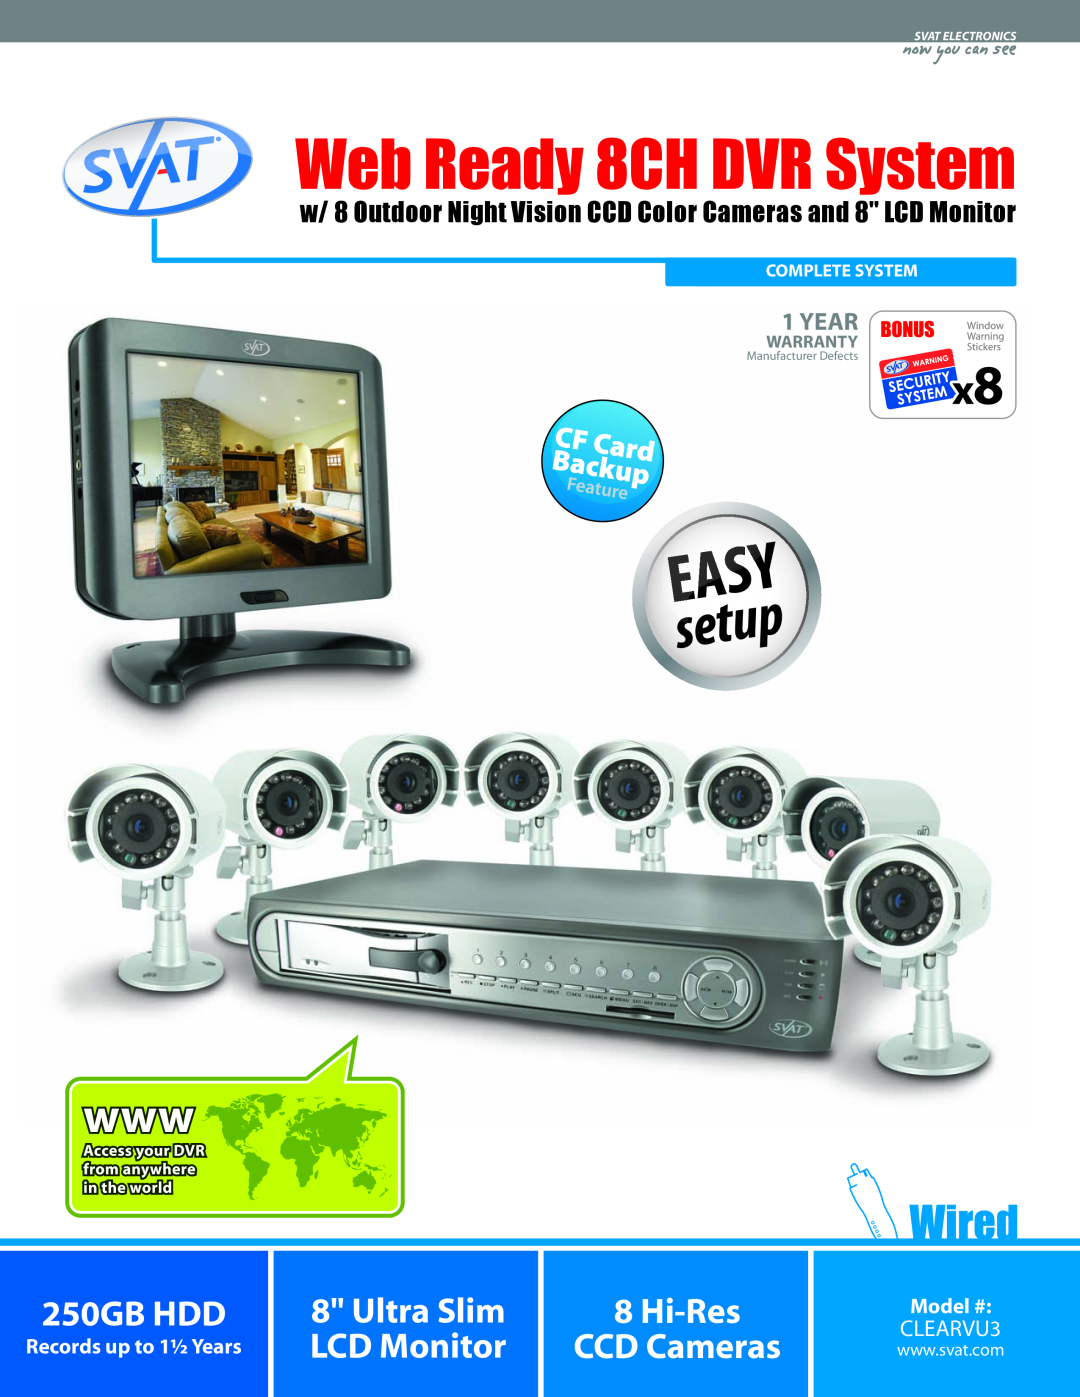 SVAT Electronics instruction manual now you can see, Model# CLEARVU3, Web Ready 8CH DVR System, Complete System 